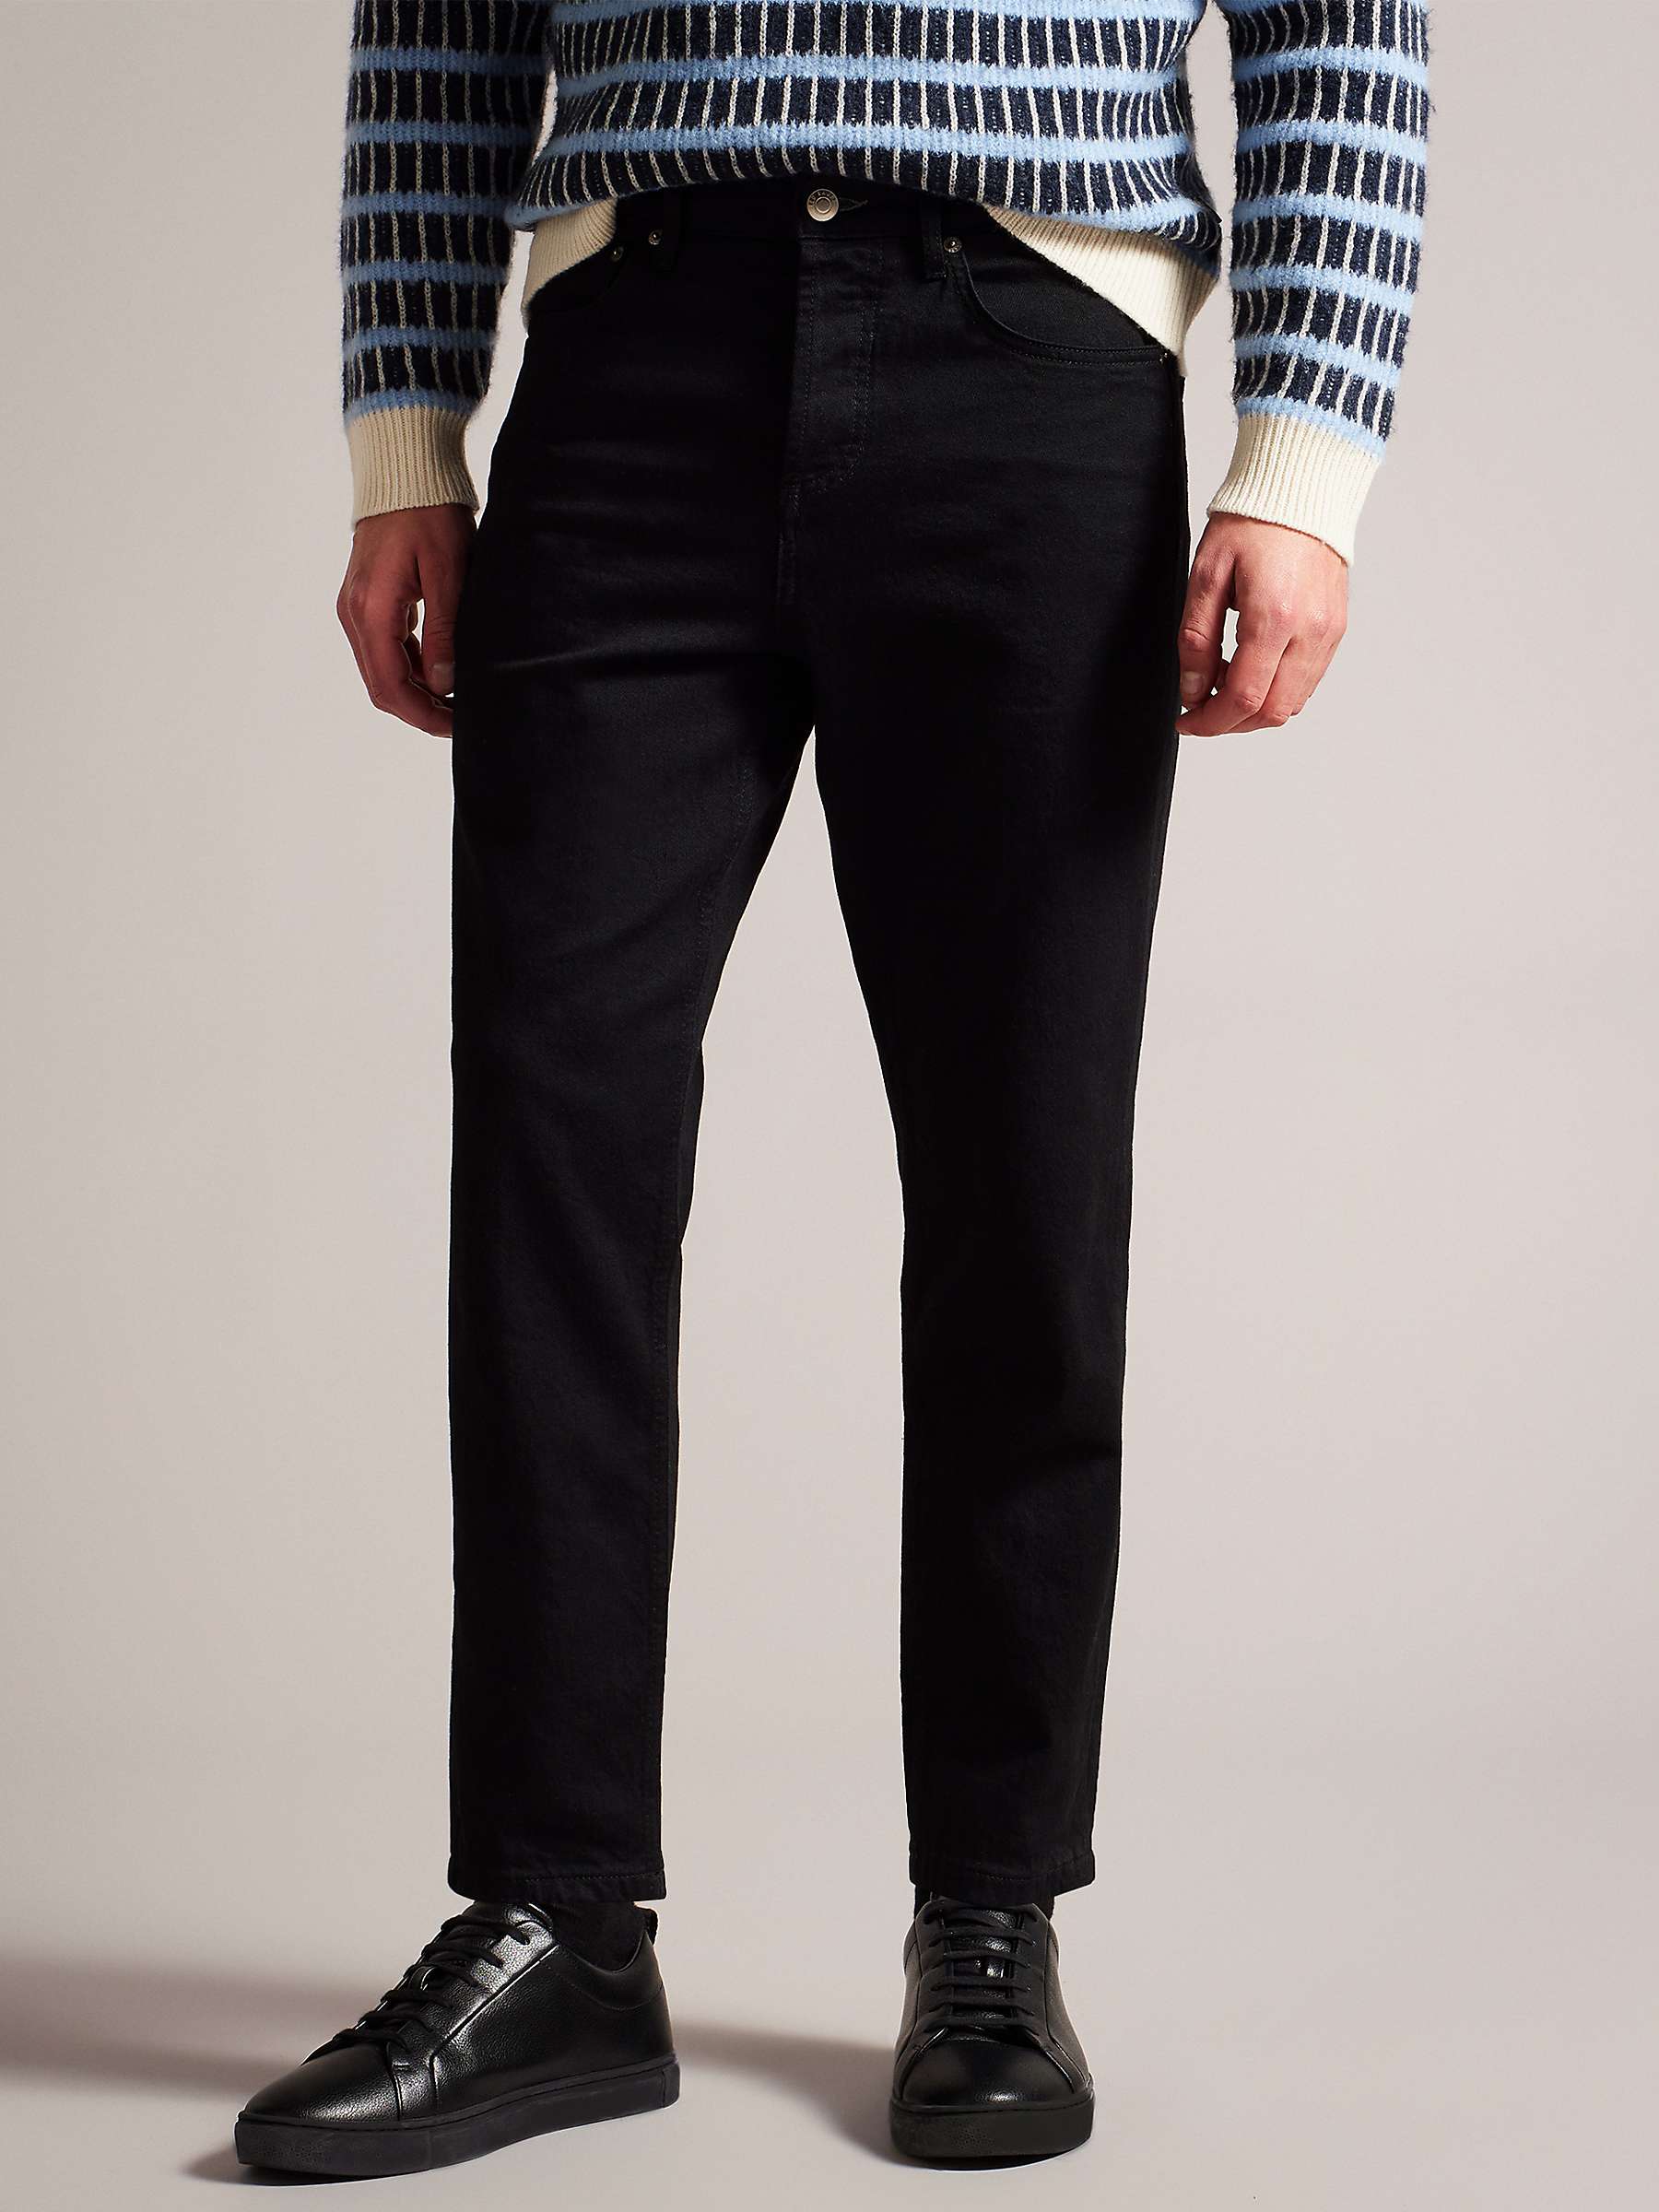 Ted Baker Dyllon Tapered Fit Stretch Jeans, Black at John Lewis & Partners